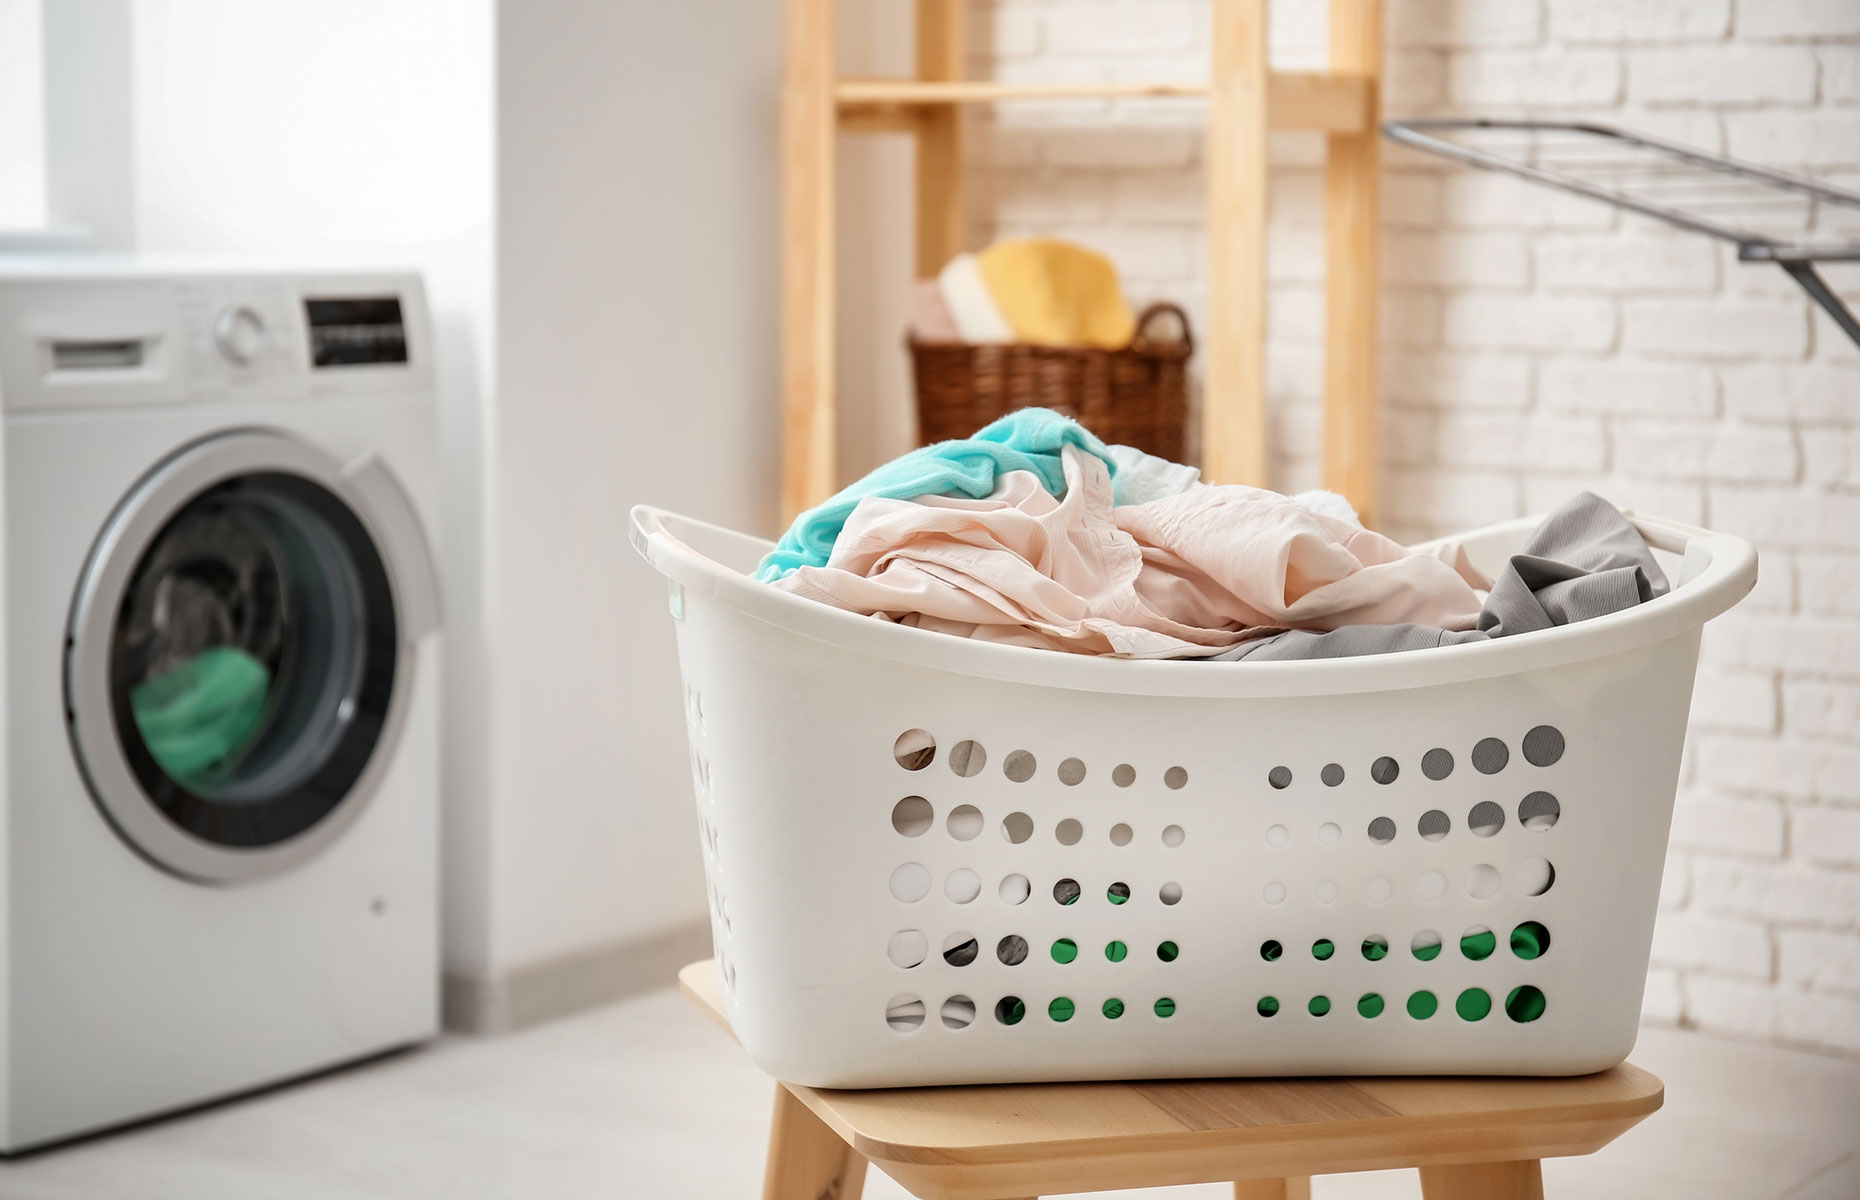 Changing and washing your clothes is key (Image: Africa Studio/Shutterstock)